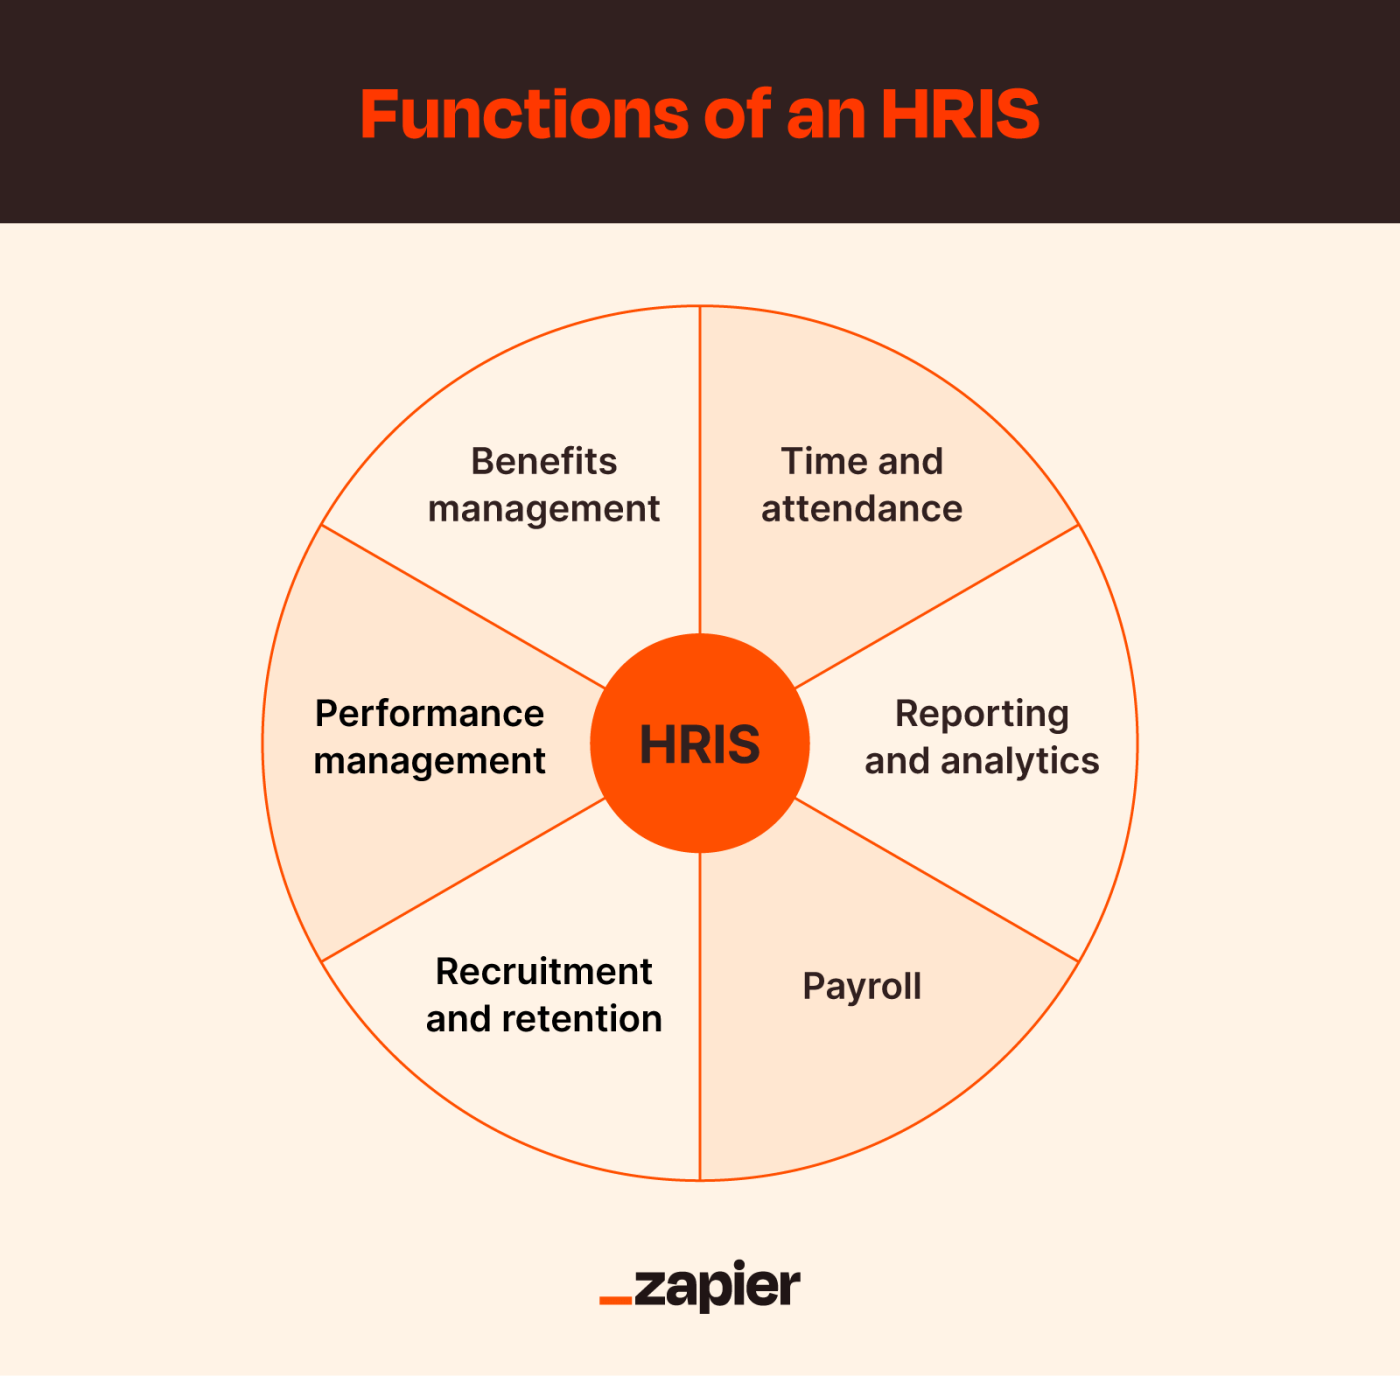 Diagram showing the different functions of an HRIS like benefits management, time and attendance and payroll